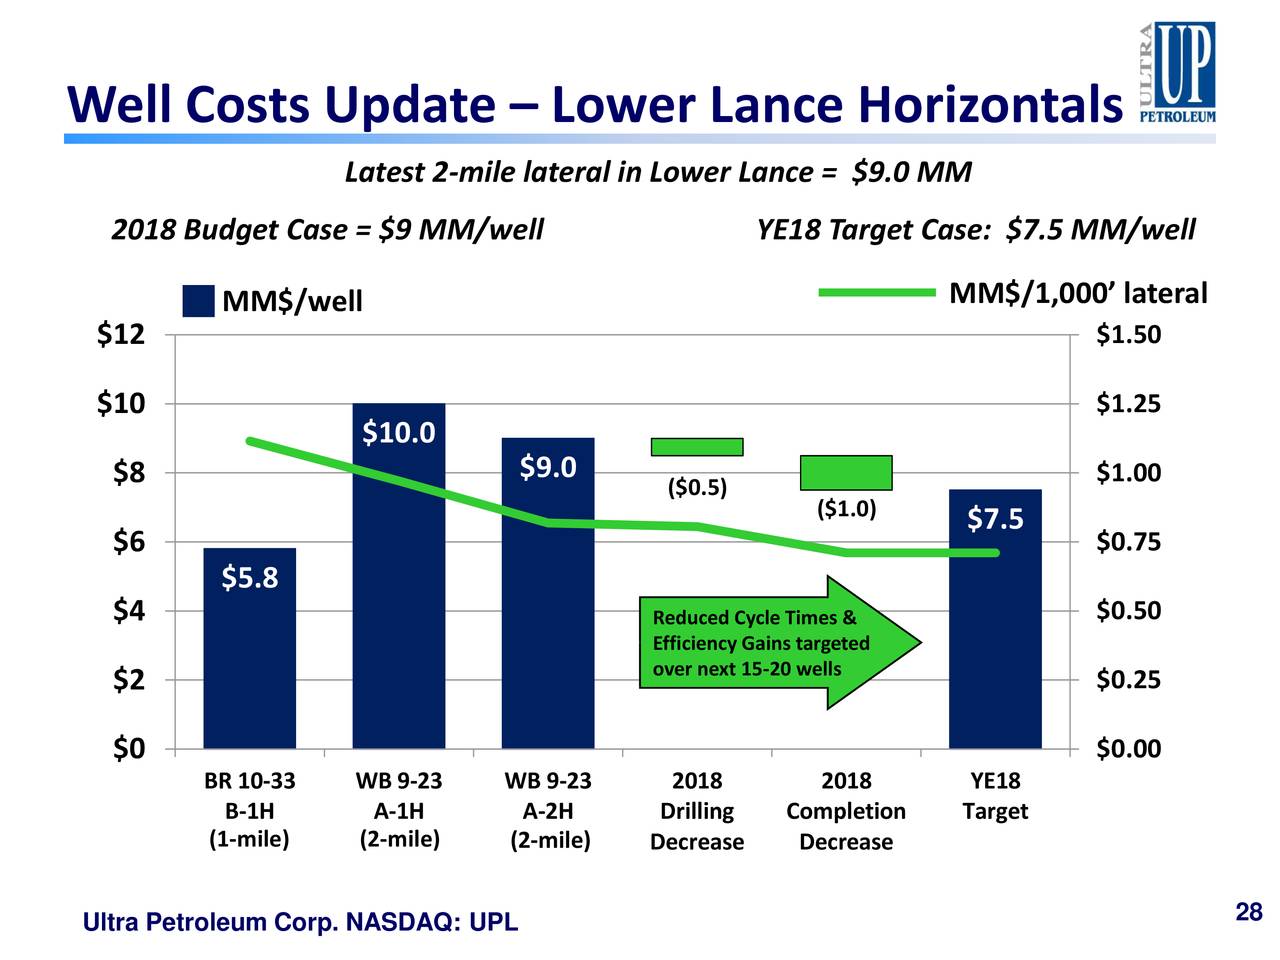 Well Costs Update – Lower Lance Horizontals